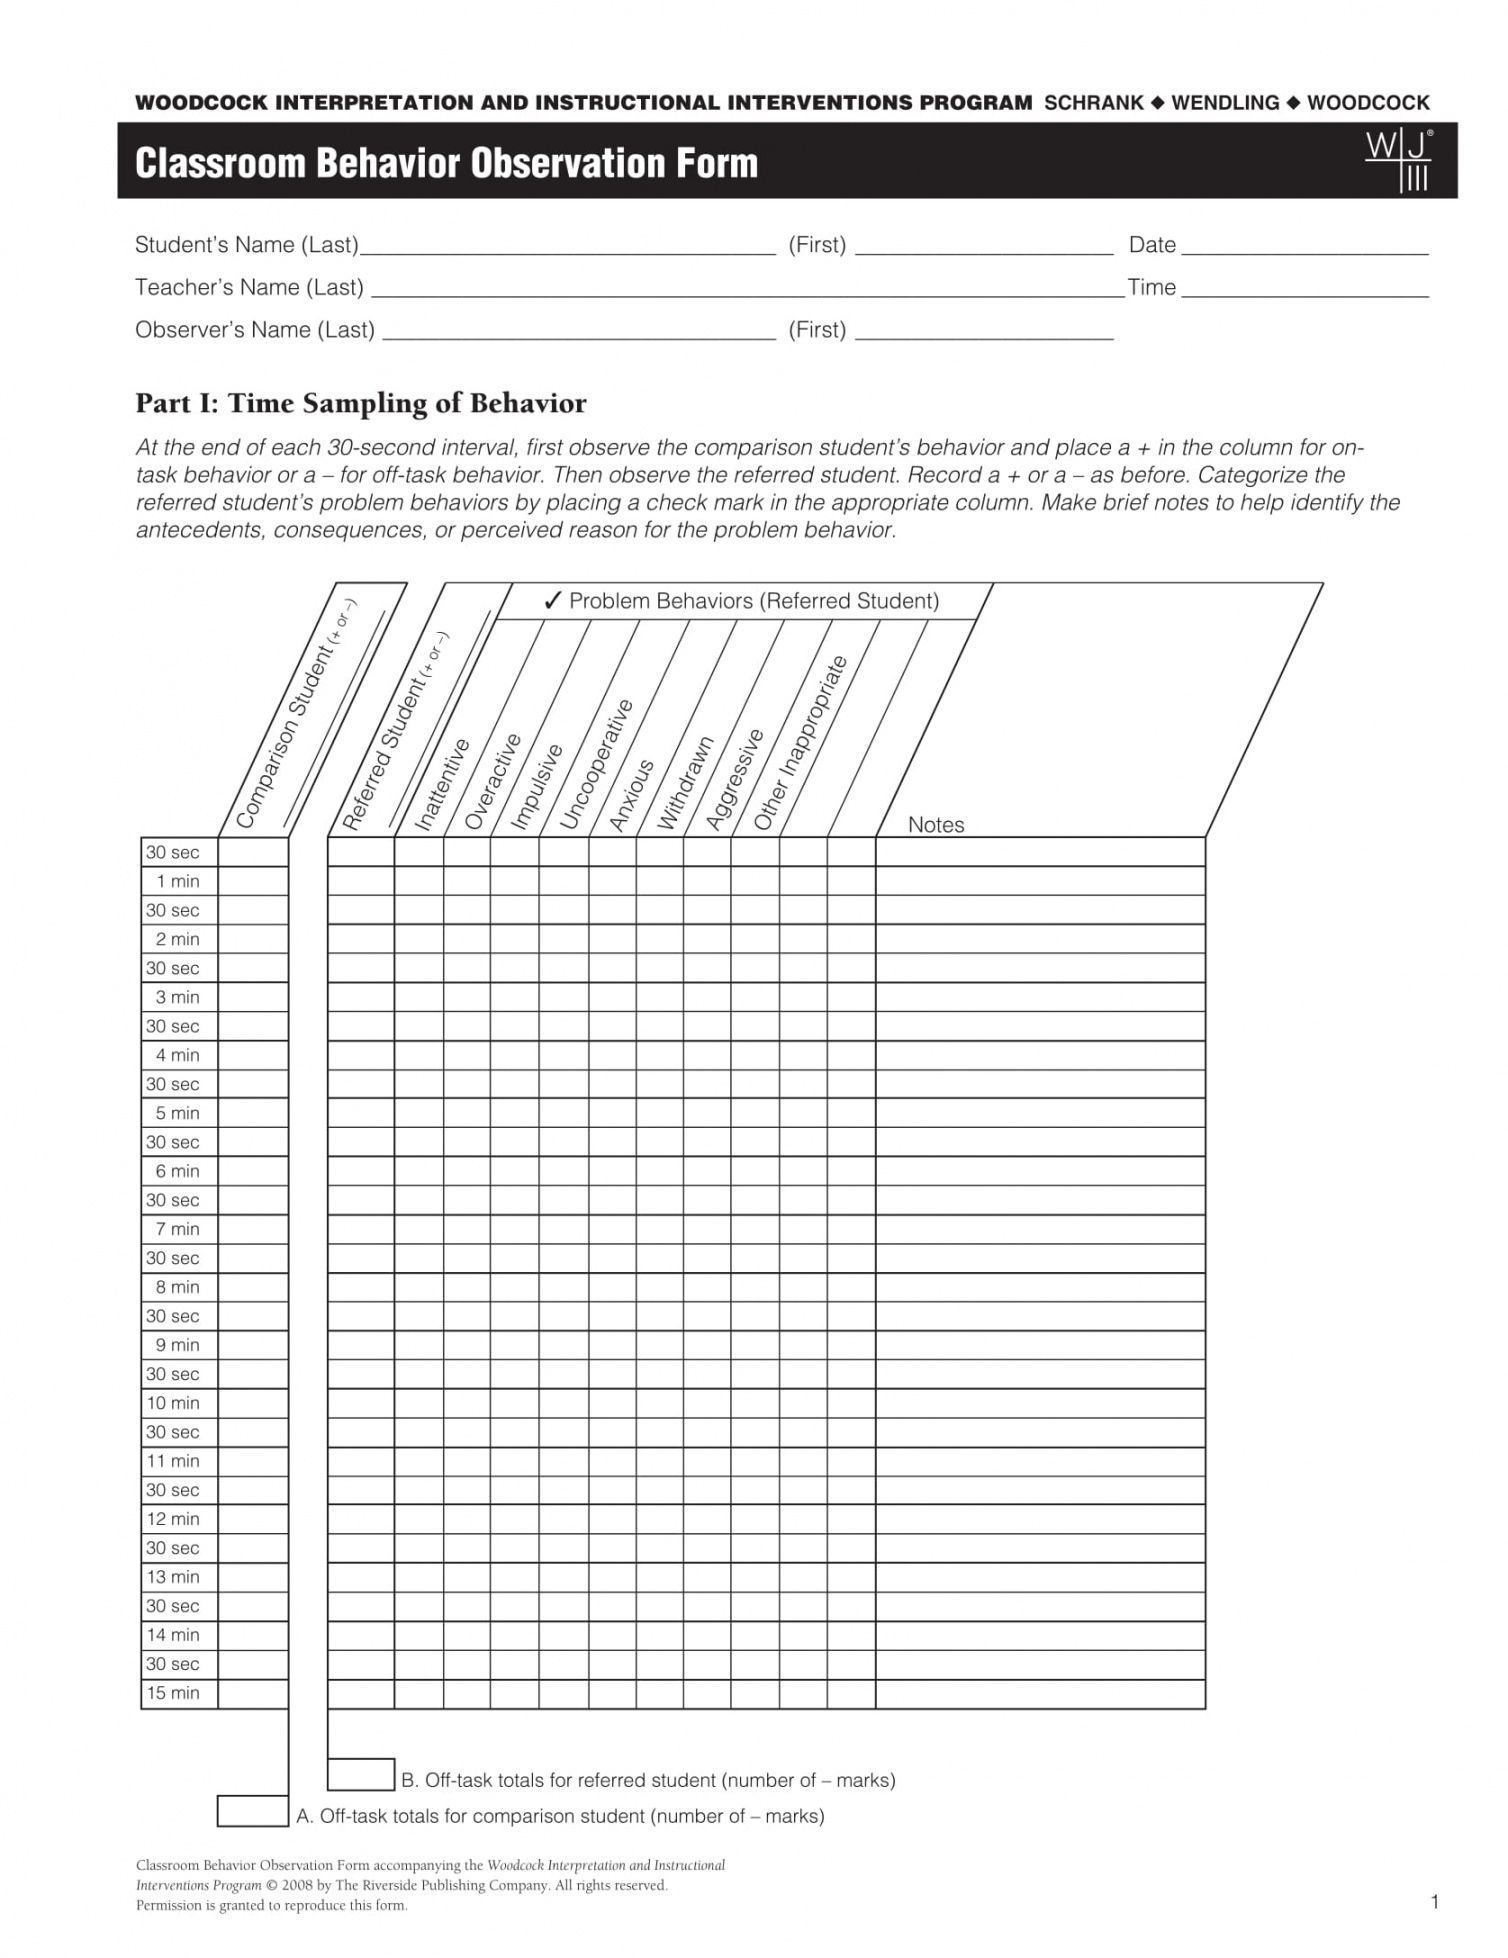 Get Our Sample Of Student Behavior Checklist Template For Free Checklist Template Assessment Checklist Student Behavior